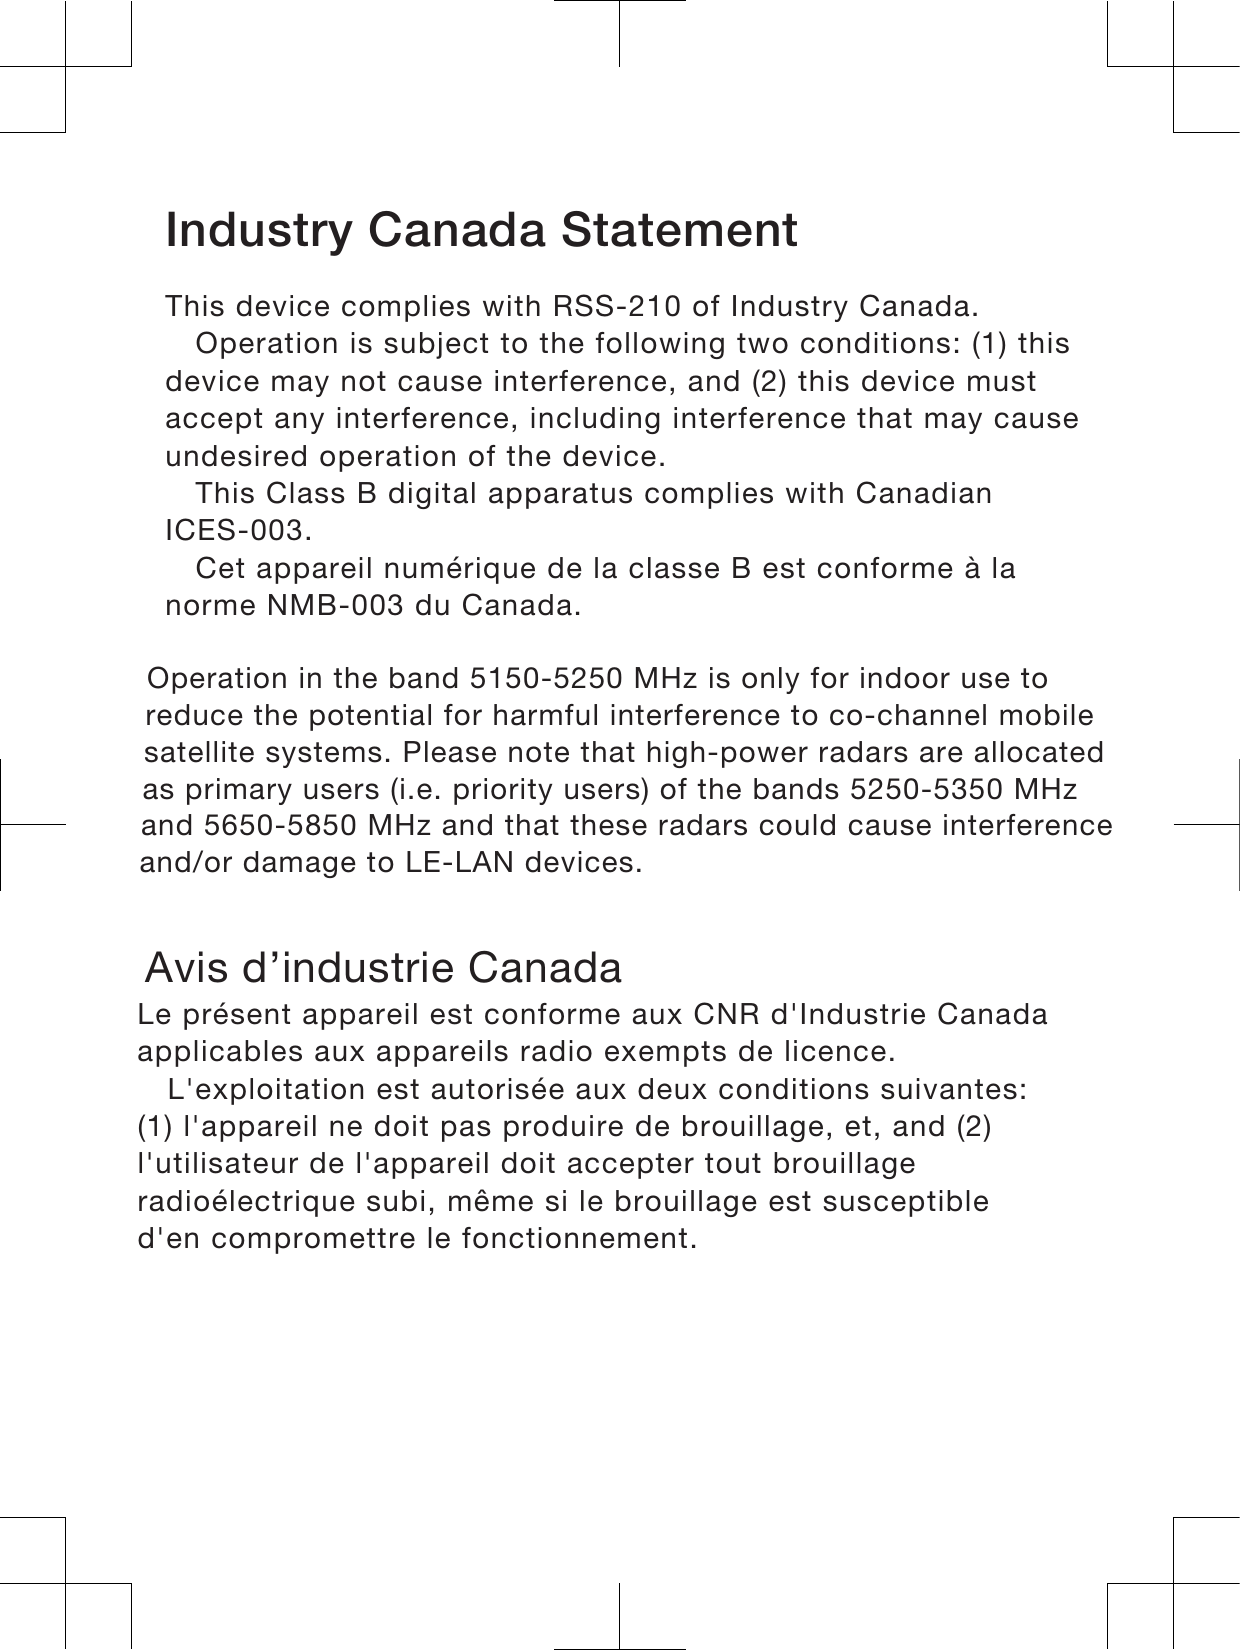 Industry Canada Statement This device complies with RSS-210 of Industry Canada.Operation is subject to the following two conditions: (1) thisdevice may not cause interference, and (2) this device mustaccept any interference, including interference that may causeundesired operation of the device.This Class B digital apparatus complies with CanadianICES-003.Cet appareil numérique de la classe B est conforme à lanorme NMB-003 du Canada. Operation in the band 5150-5250 MHz is only for indoor use to reduce the potential for harmful interference to co-channel mobile satellite systems. Please note that high-power radars are allocated as primary users (i.e. priority users) of the bands 5250-5350 MHz and 5650-5850 MHz and that these radars could cause interference and/or damage to LE-LAN devices.      Avis d’industrie CanadaLe présent appareil est conforme aux CNR d&apos;Industrie Canadaapplicables aux appareils radio exempts de licence.L&apos;exploitation est autorisée aux deux conditions suivantes:(1) l&apos;appareil ne doit pas produire de brouillage, et, and (2)l&apos;utilisateur de l&apos;appareil doit accepter tout brouillageradioélectrique subi, même si le brouillage est susceptibled&apos;en compromettre le fonctionnement.18